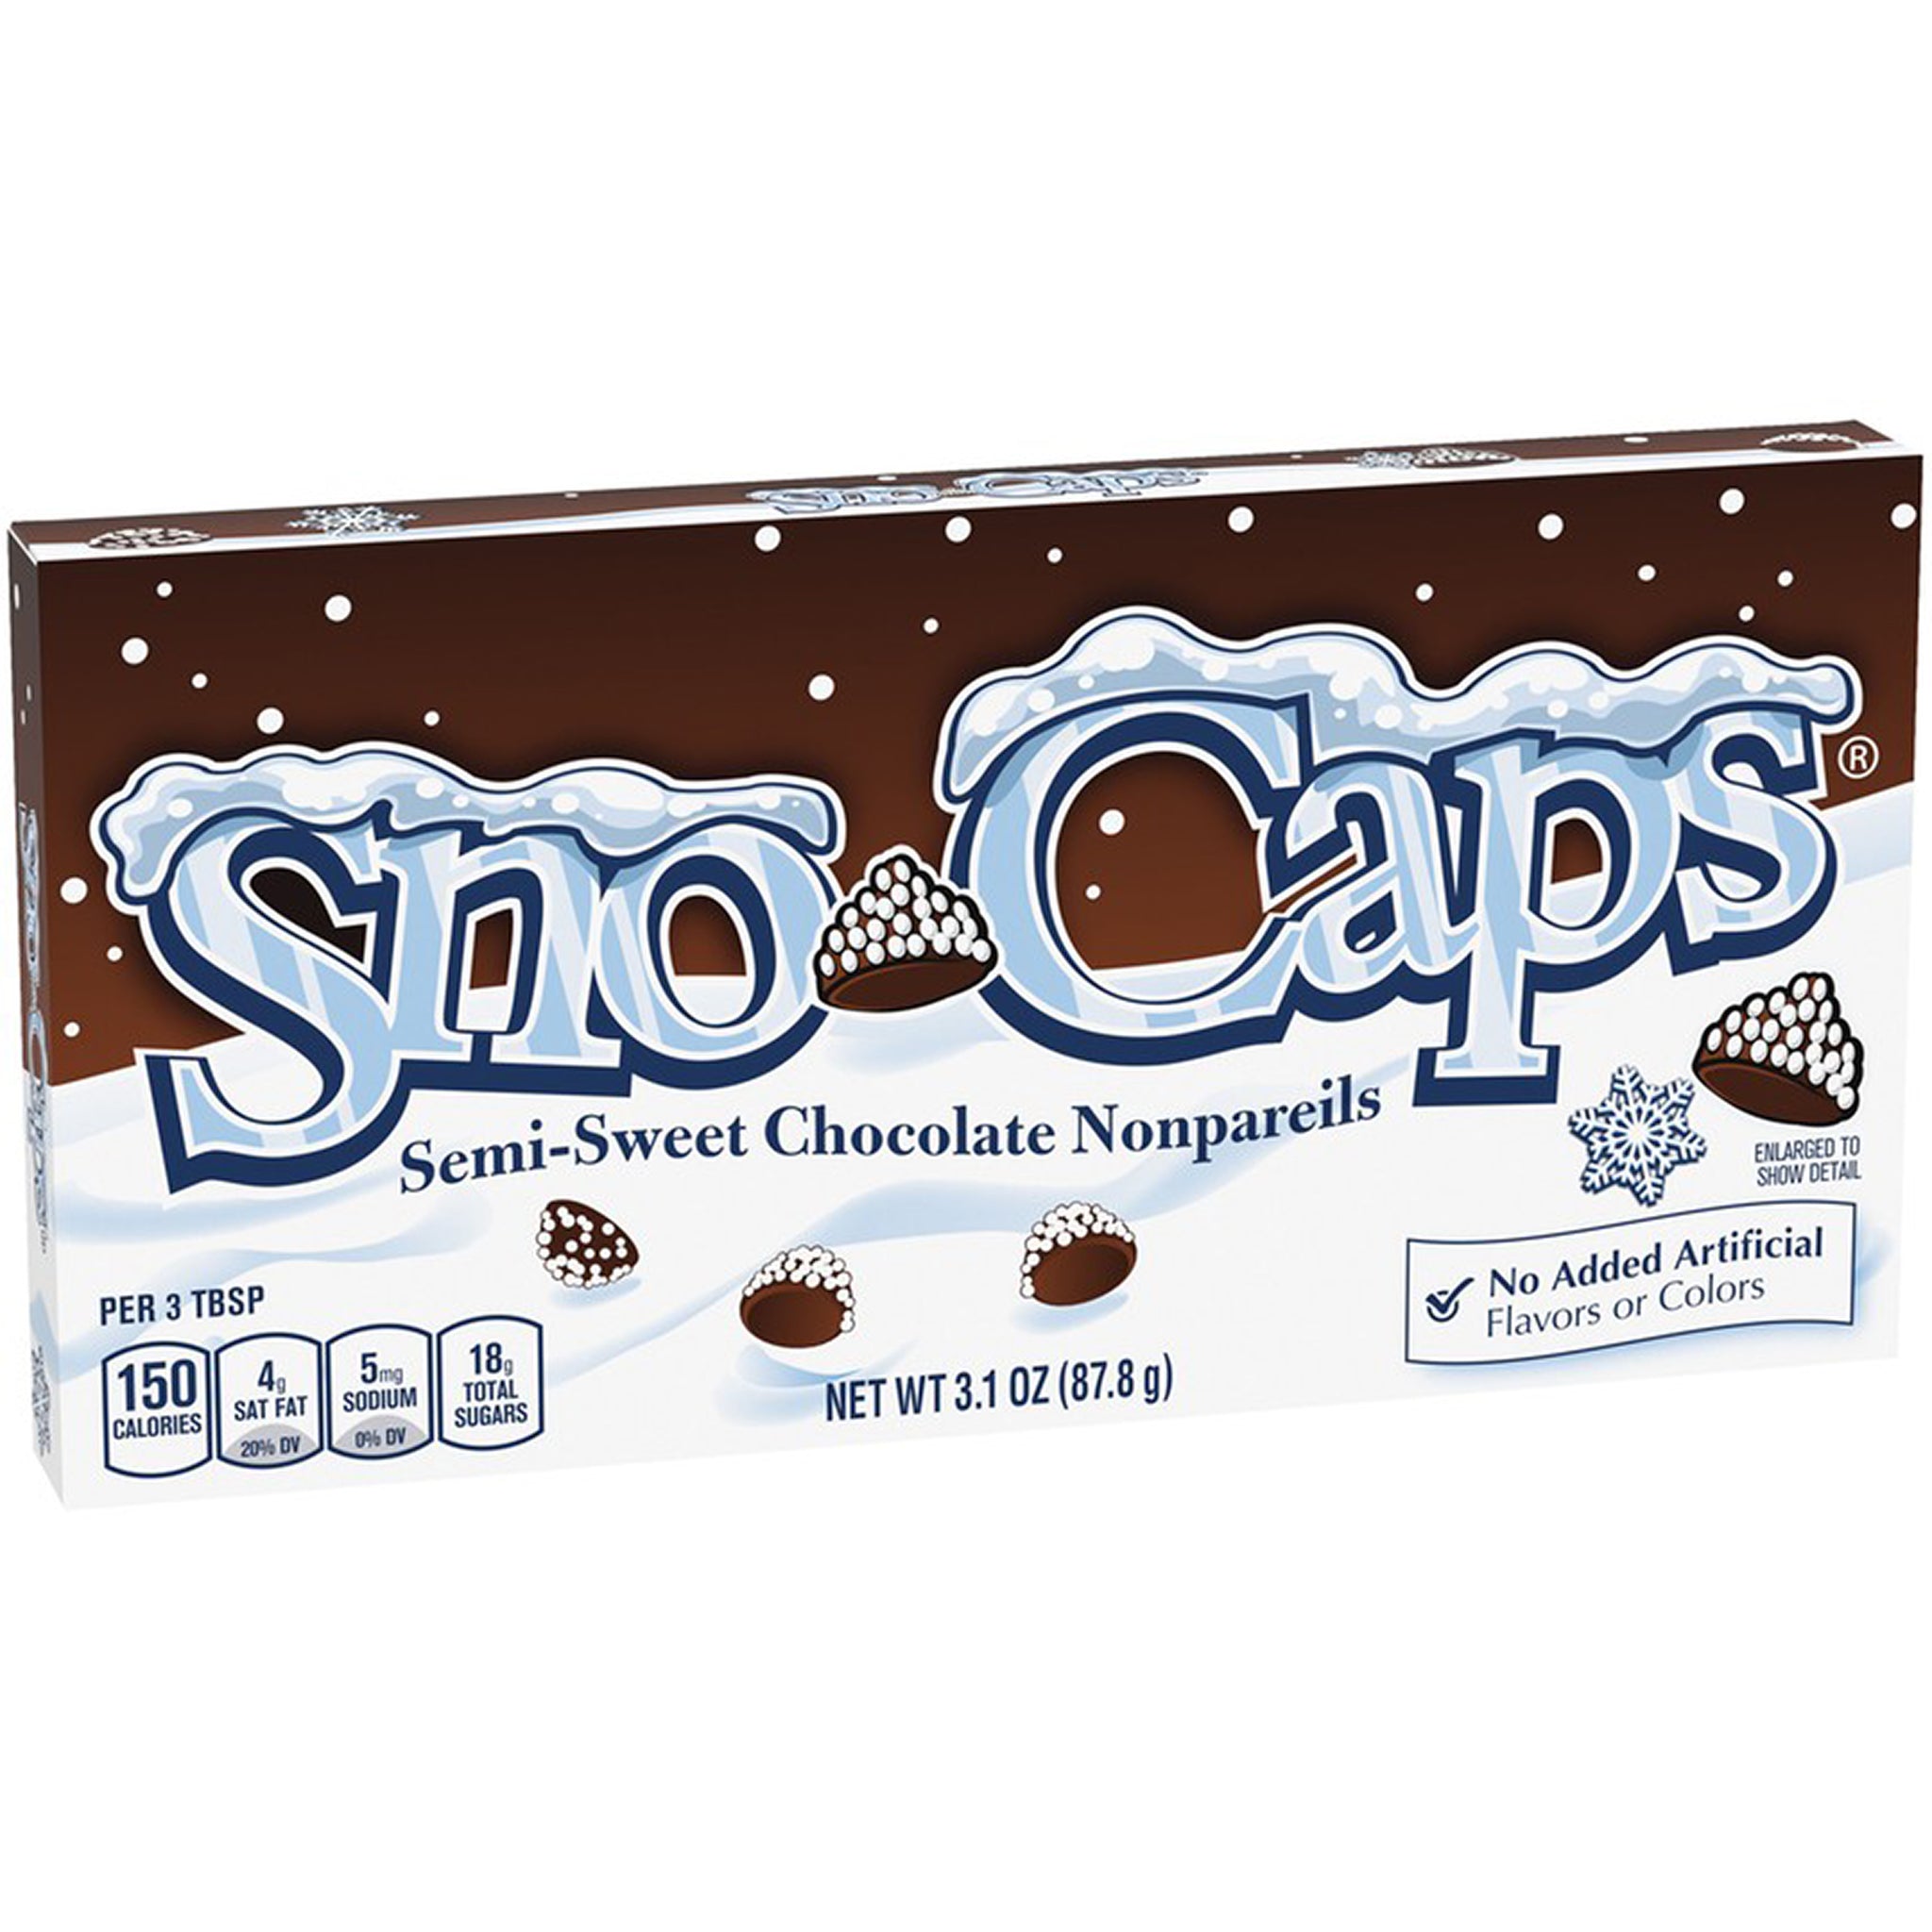 Sno Caps (Pack of 3) 3.1oz Movie Theater Size!!